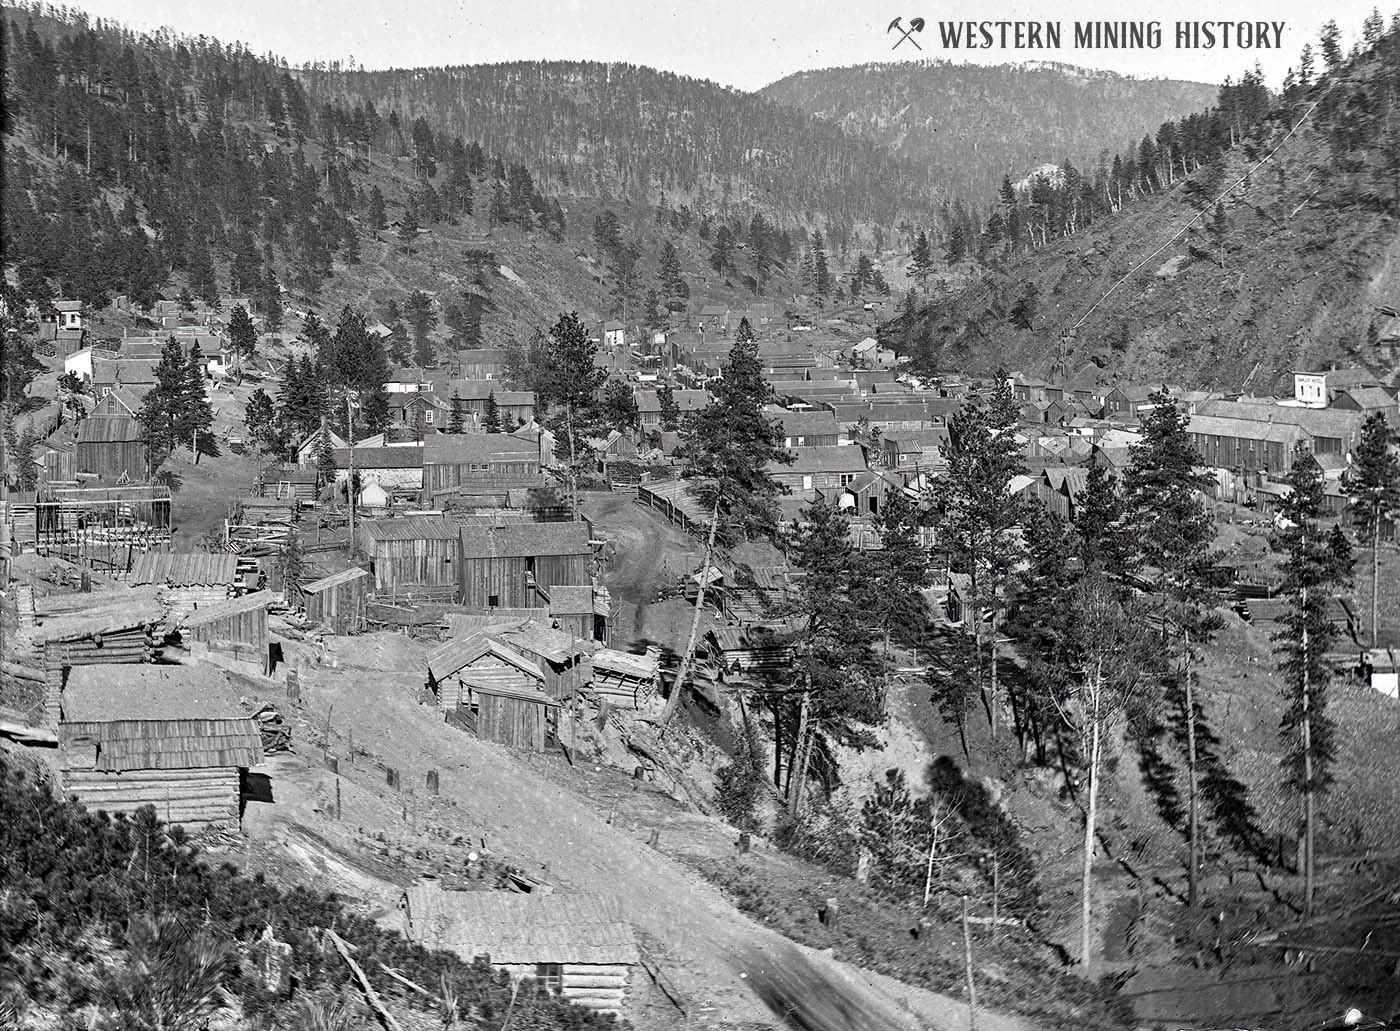 View of Deadwood from the West 1877